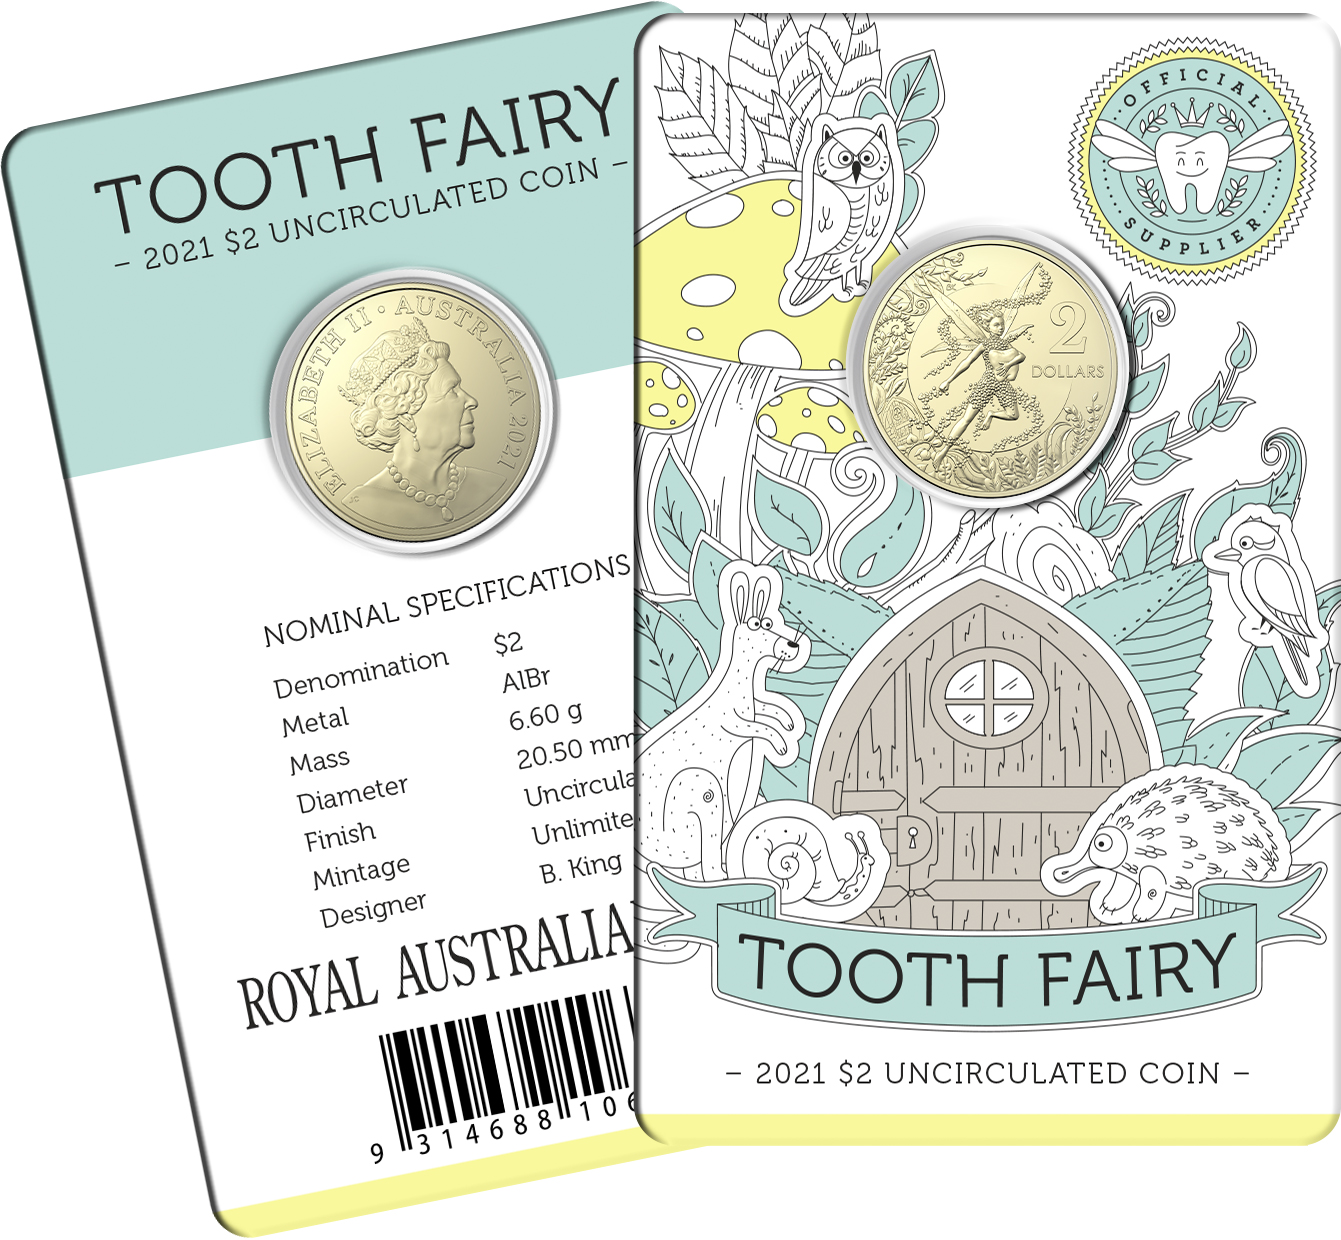 Thumbnail for 2021 $2 Tooth Fairy UNC Coin on Card